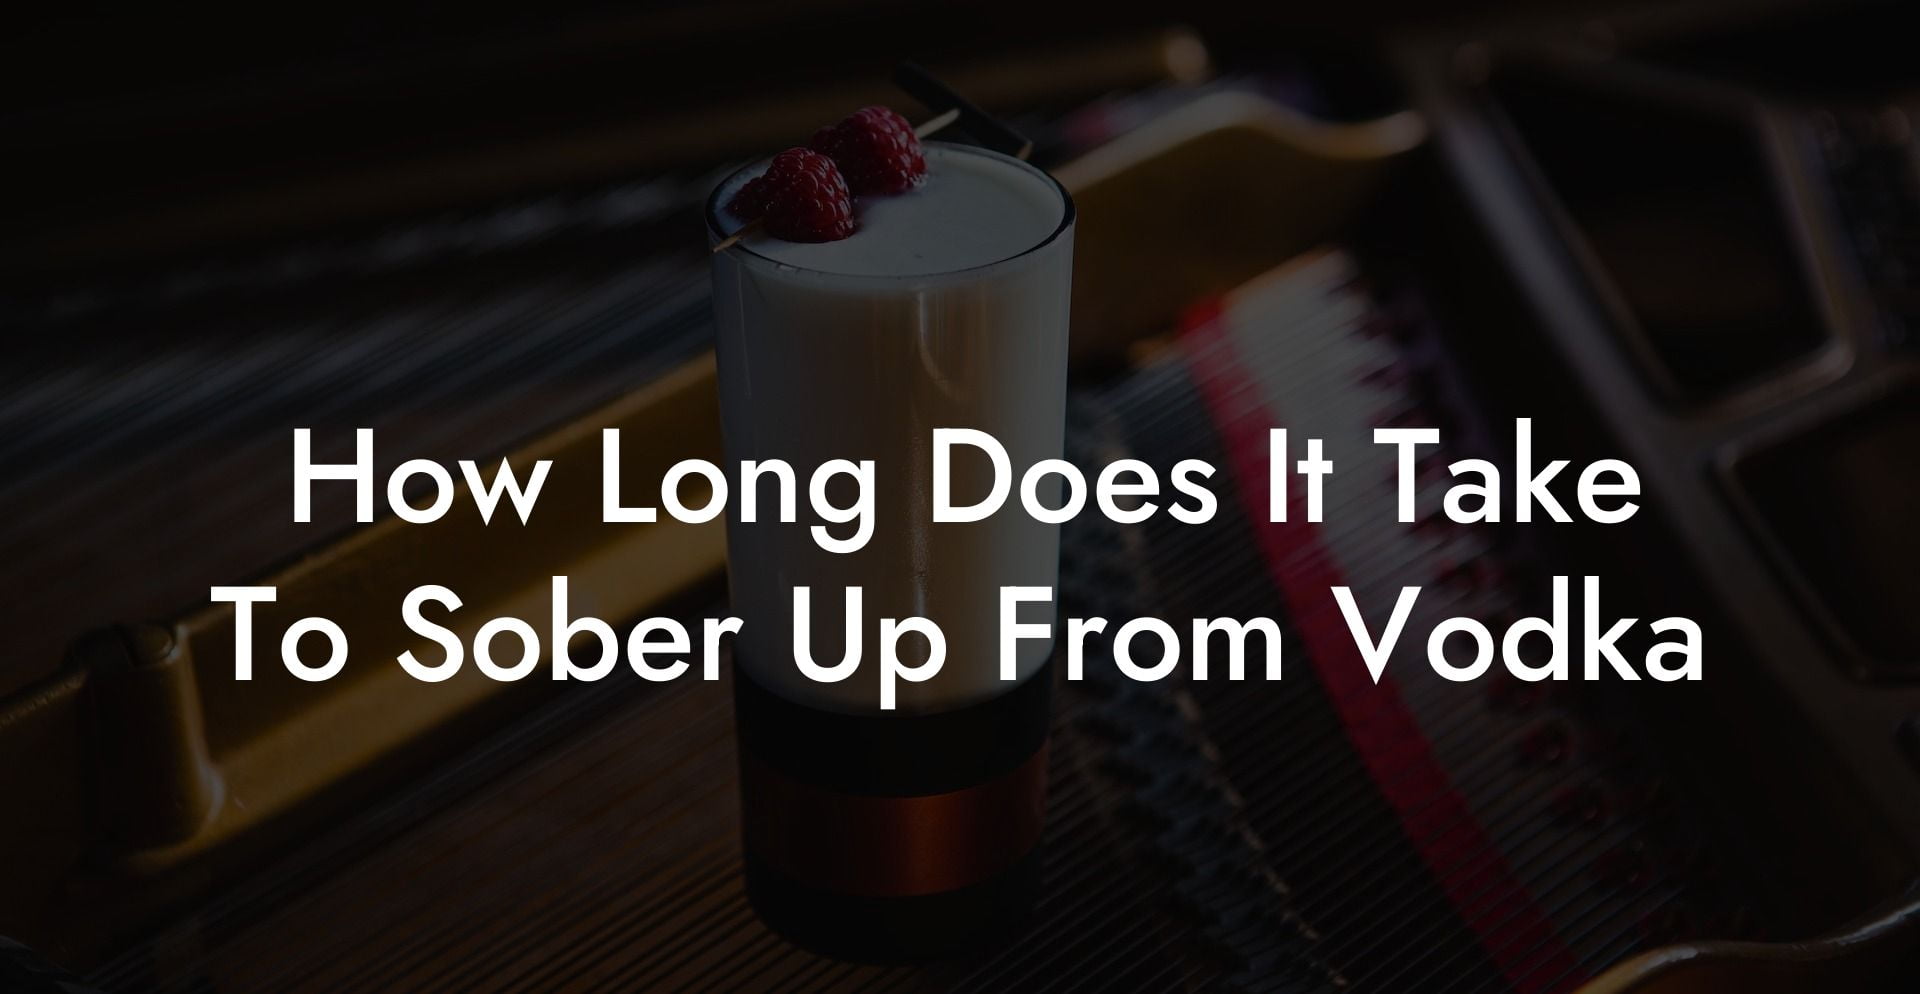 How Long Does It Take To Sober Up From Vodka